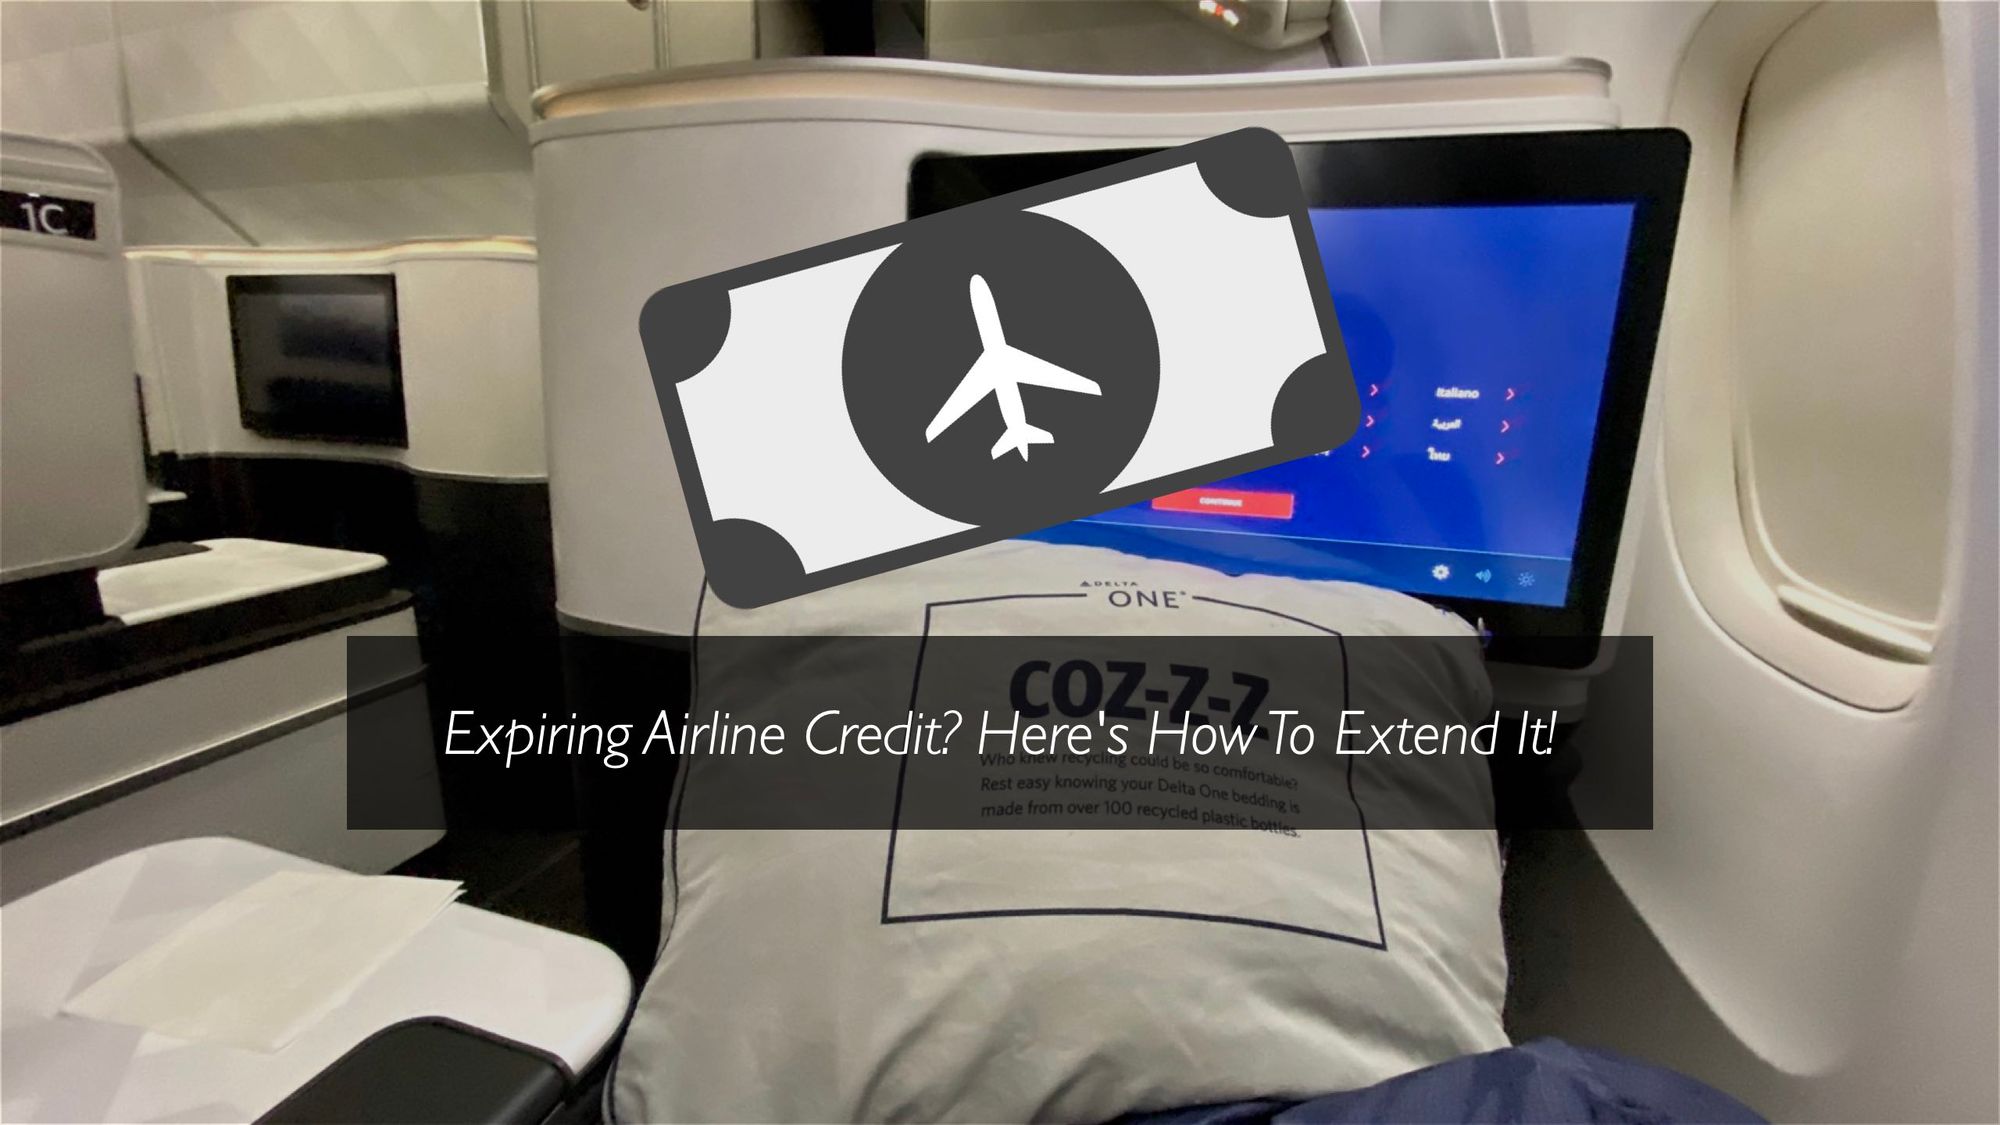 Expiring Airline Credit? Here’s How To Extend It!